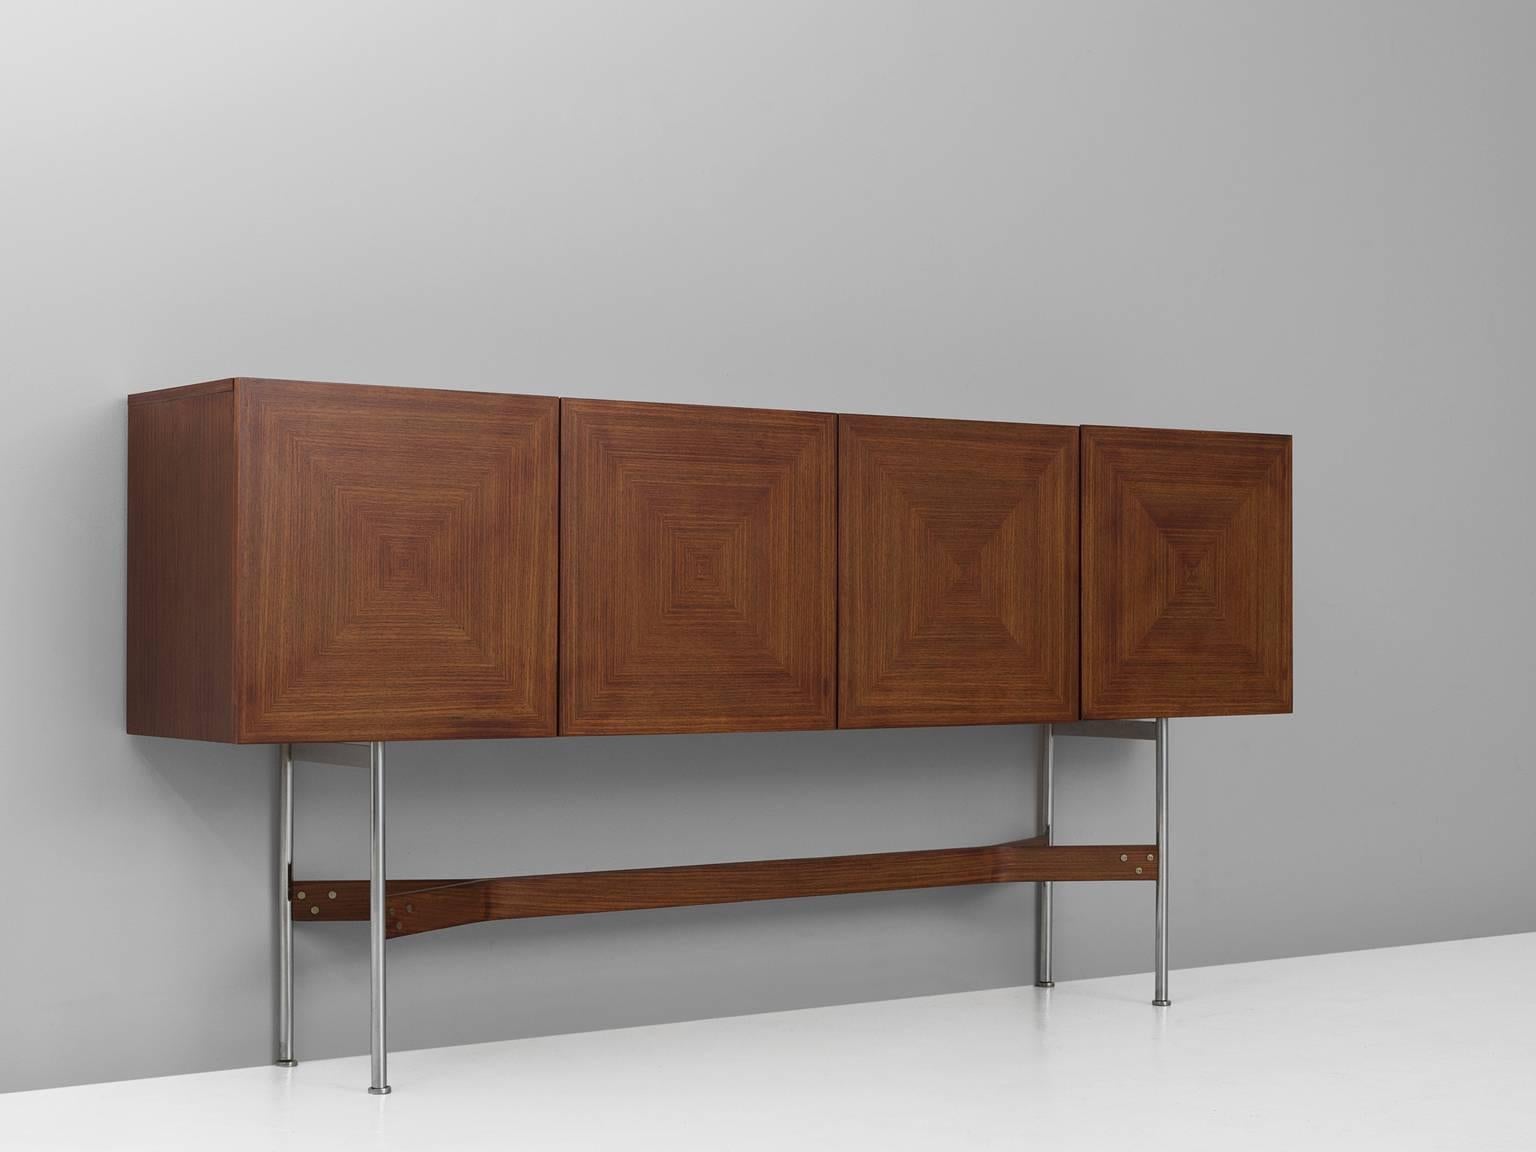 Rudolf Bernd Glatzel for Fristho Franeker, sideboard, rosewood and metal, the Netherlands, 1962. 

Very well crafted highboard with beautiful proportions. The elegant brushed metal and rosewood base contribute to the floating effect of the four